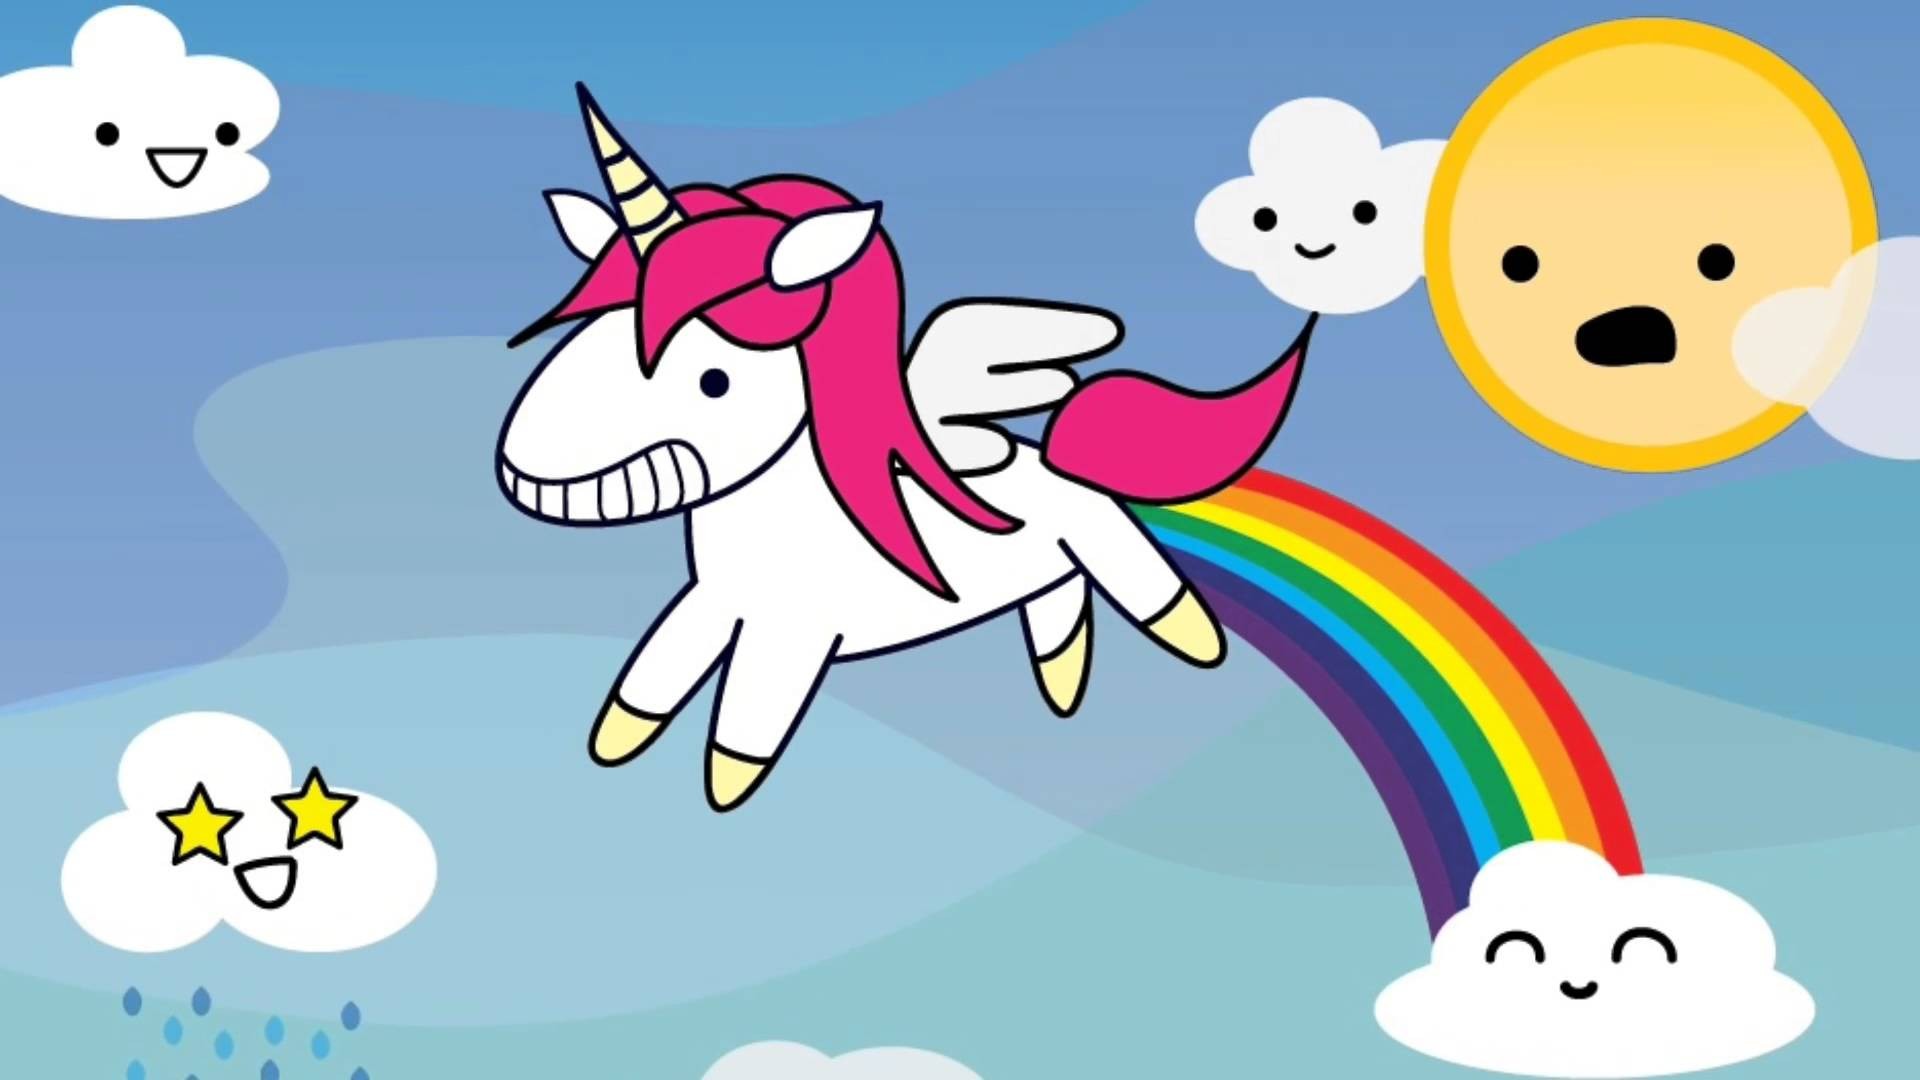 Unicorn Desktop Wallpaper With high-resolution 1920X1080 pixel. You can use this wallpaper for your Windows and Mac OS computers as well as your Android and iPhone smartphones